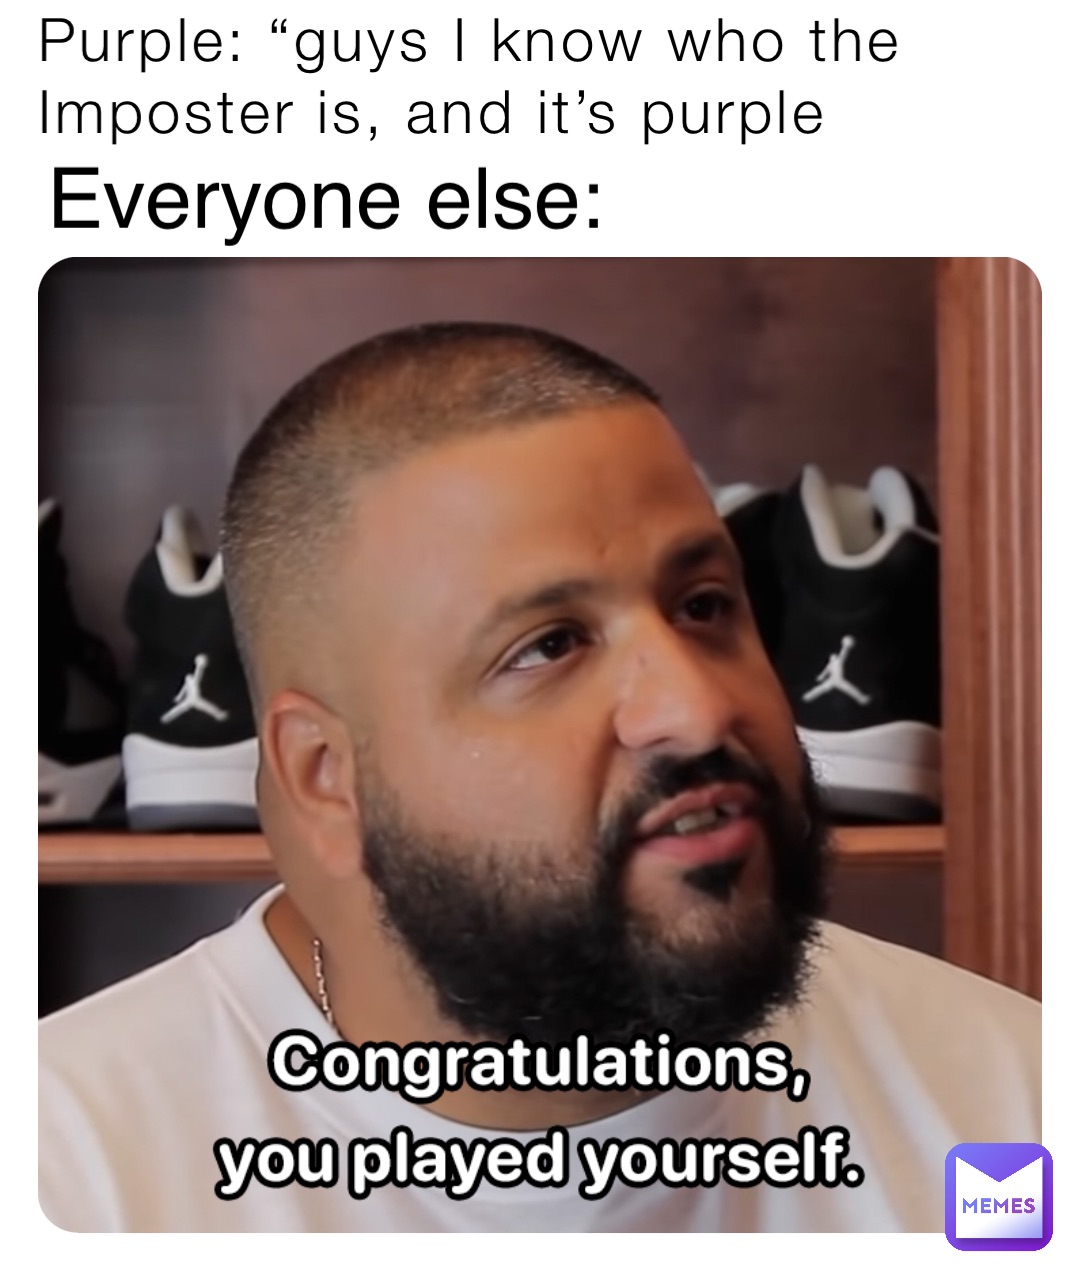 Congratulations you played yourself - Meme Guy